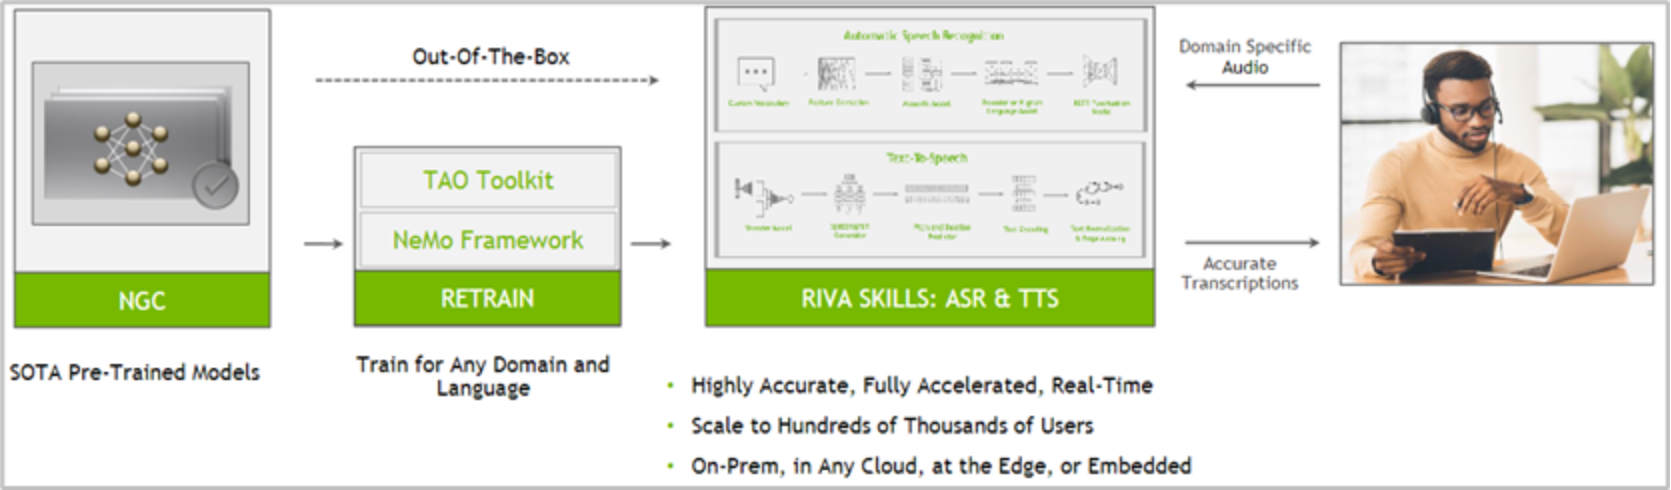 Flowchart showing that NVIDIA Riva is deployed from NGC and can be used out-of-the-box or retrained to execute automatic speech recognition or text-to-speech.